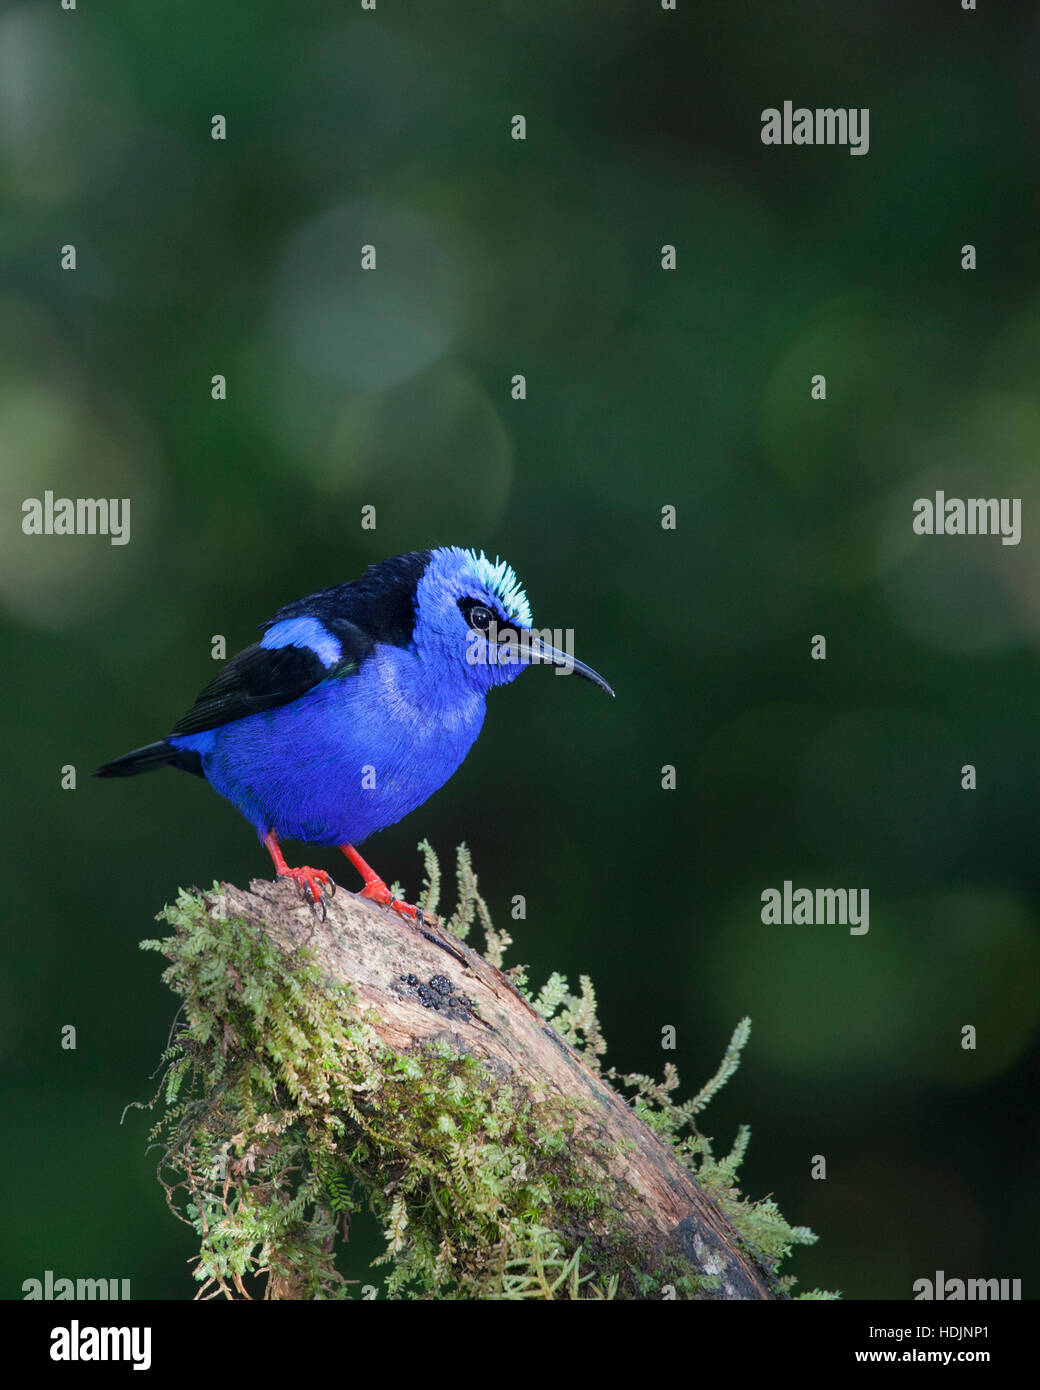 Male Red-legged Honeycreeper (Cyanerpes cyaneus) in northern Costa Rica rainforest canopy Stock Photo